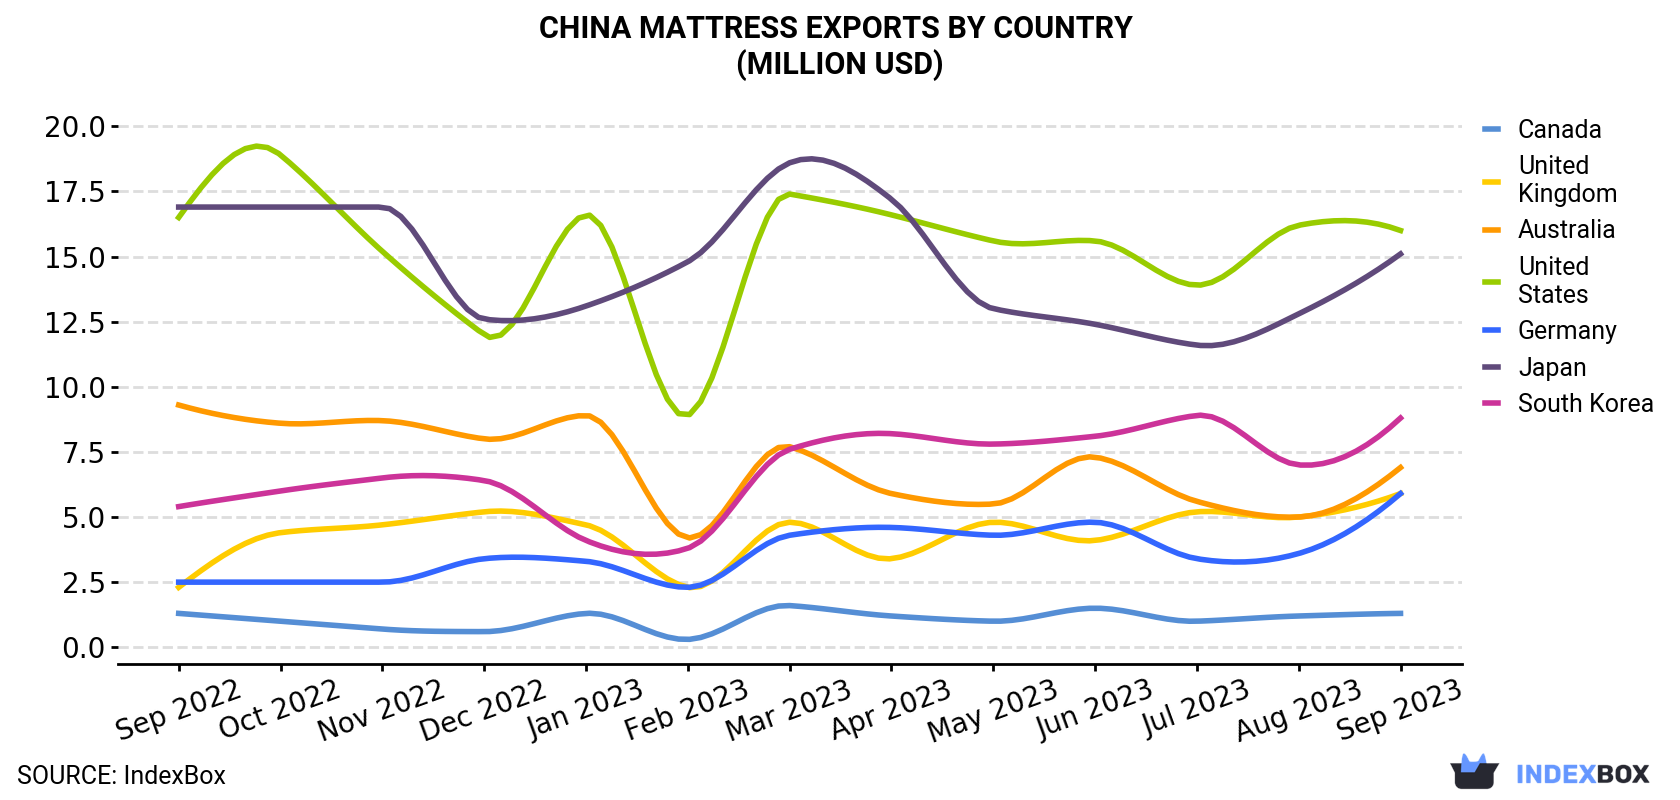 China Mattress Exports By Country (Million USD)